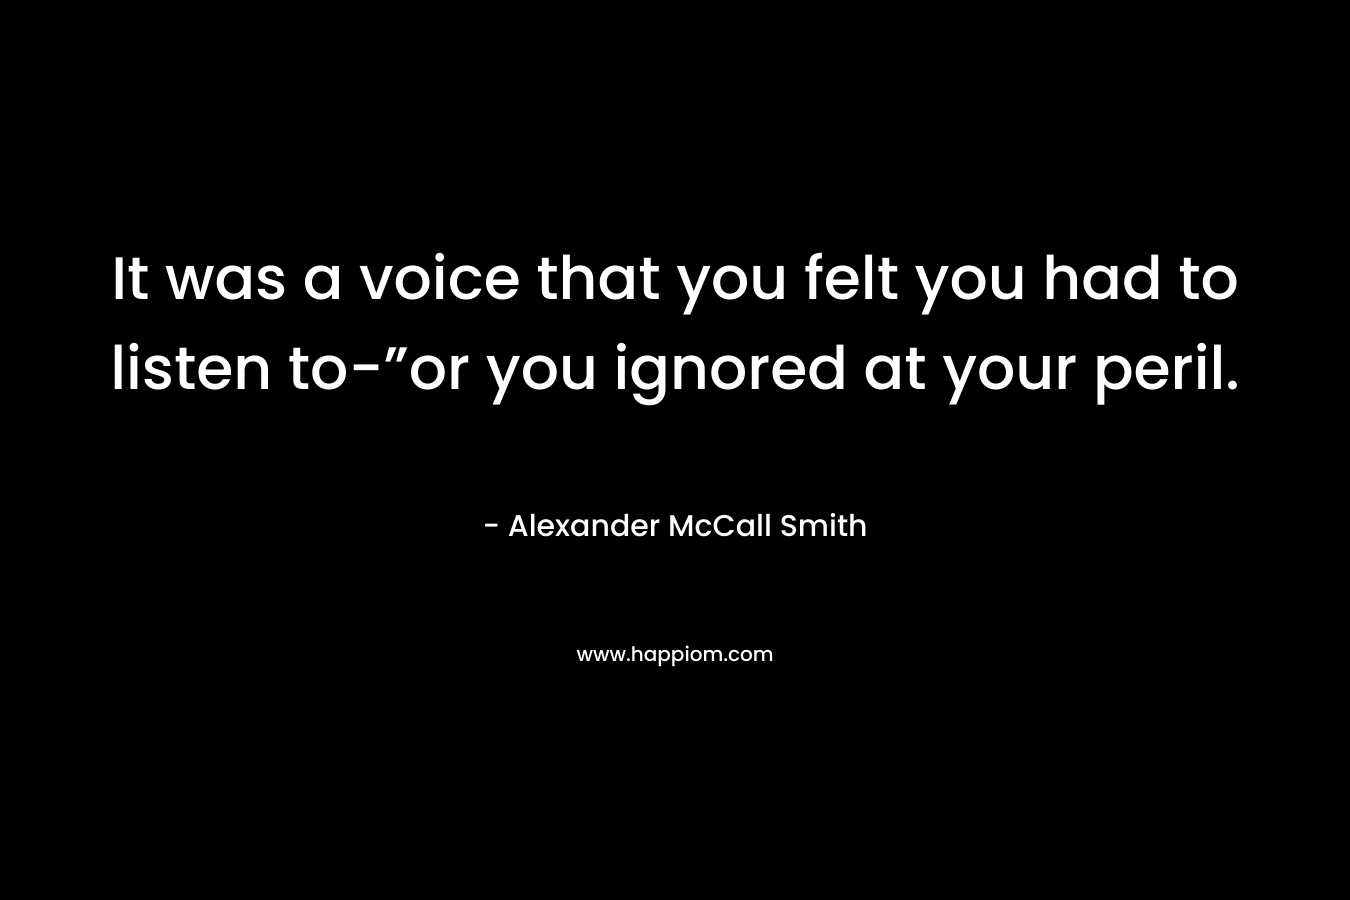 It was a voice that you felt you had to listen to-”or you ignored at your peril. – Alexander McCall Smith